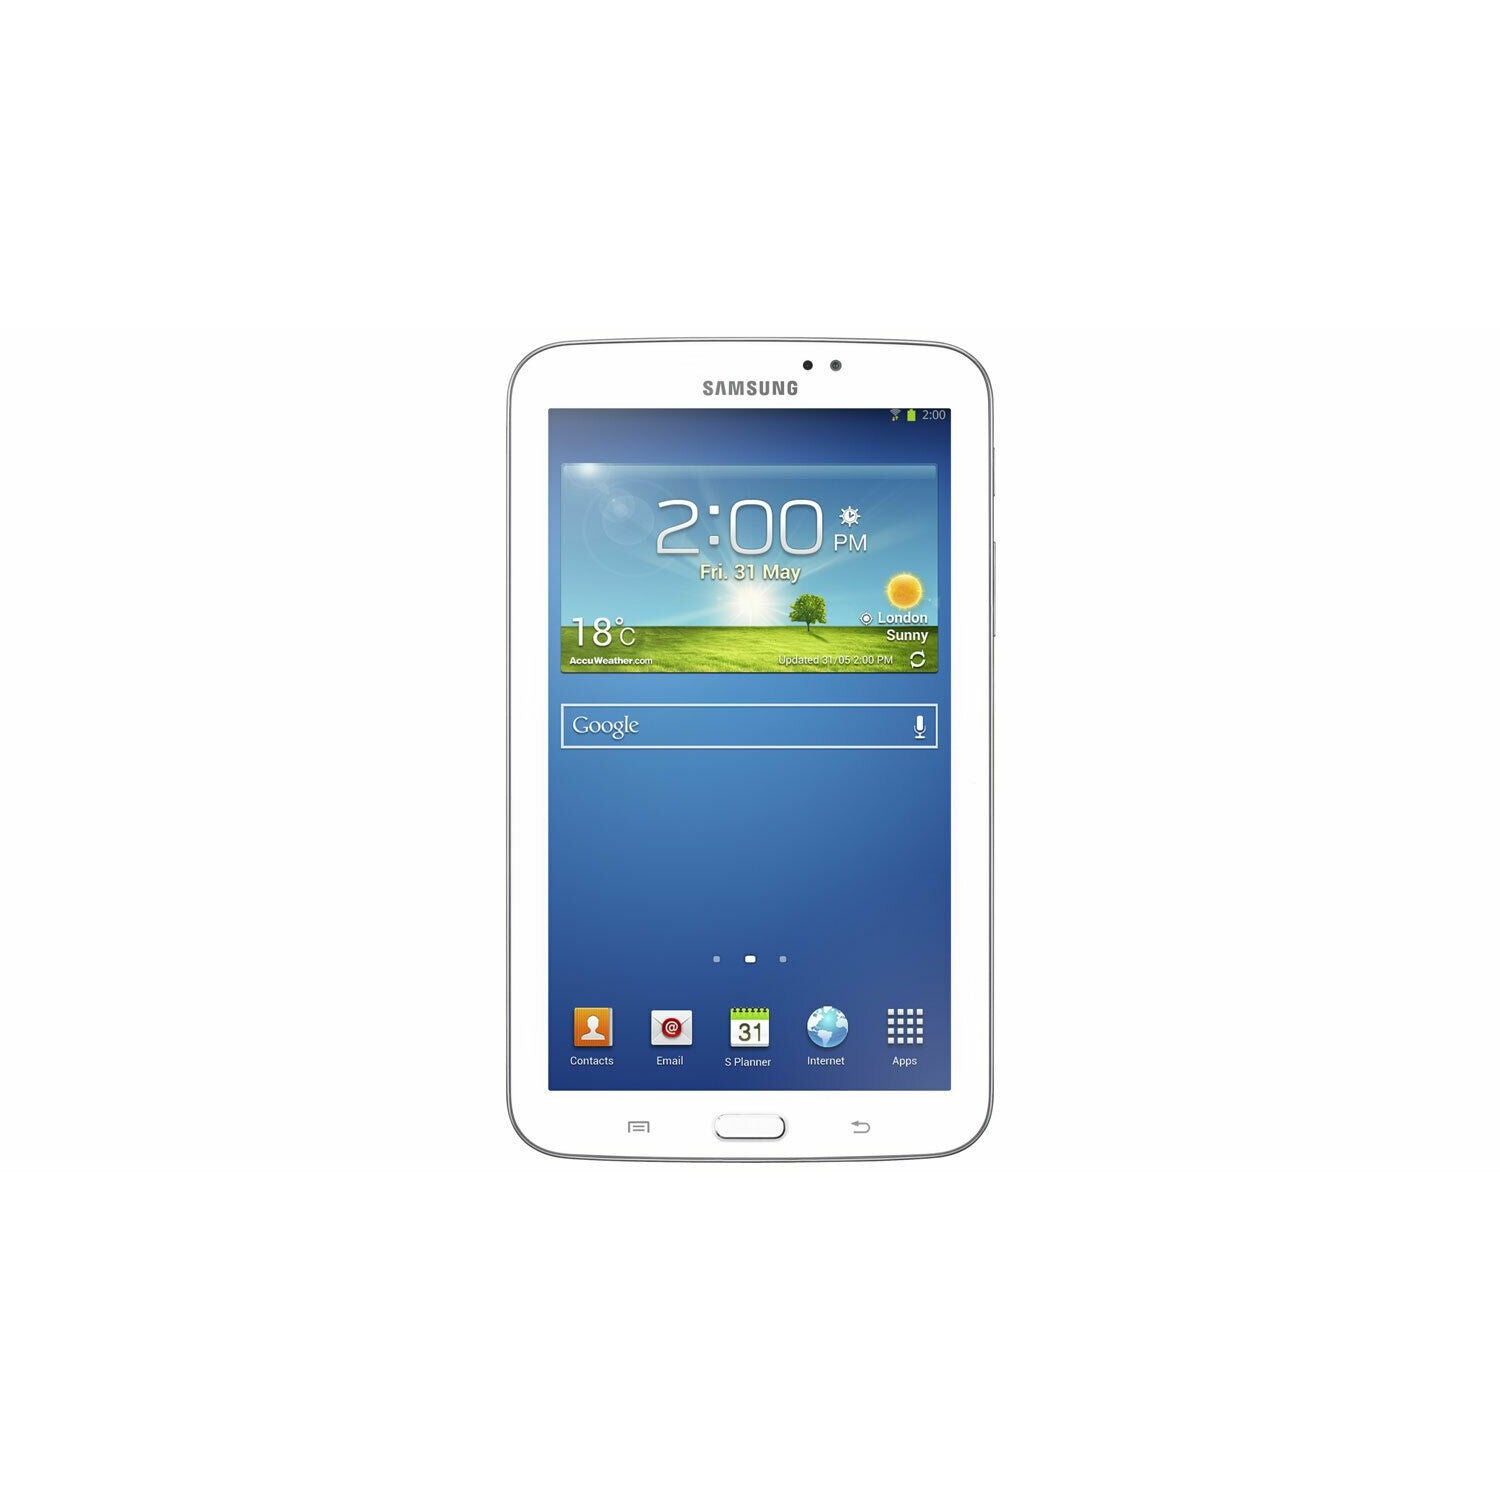 Samsung Galaxy Tab 3 8GB 7 inch Android Tablet SM-T210 White